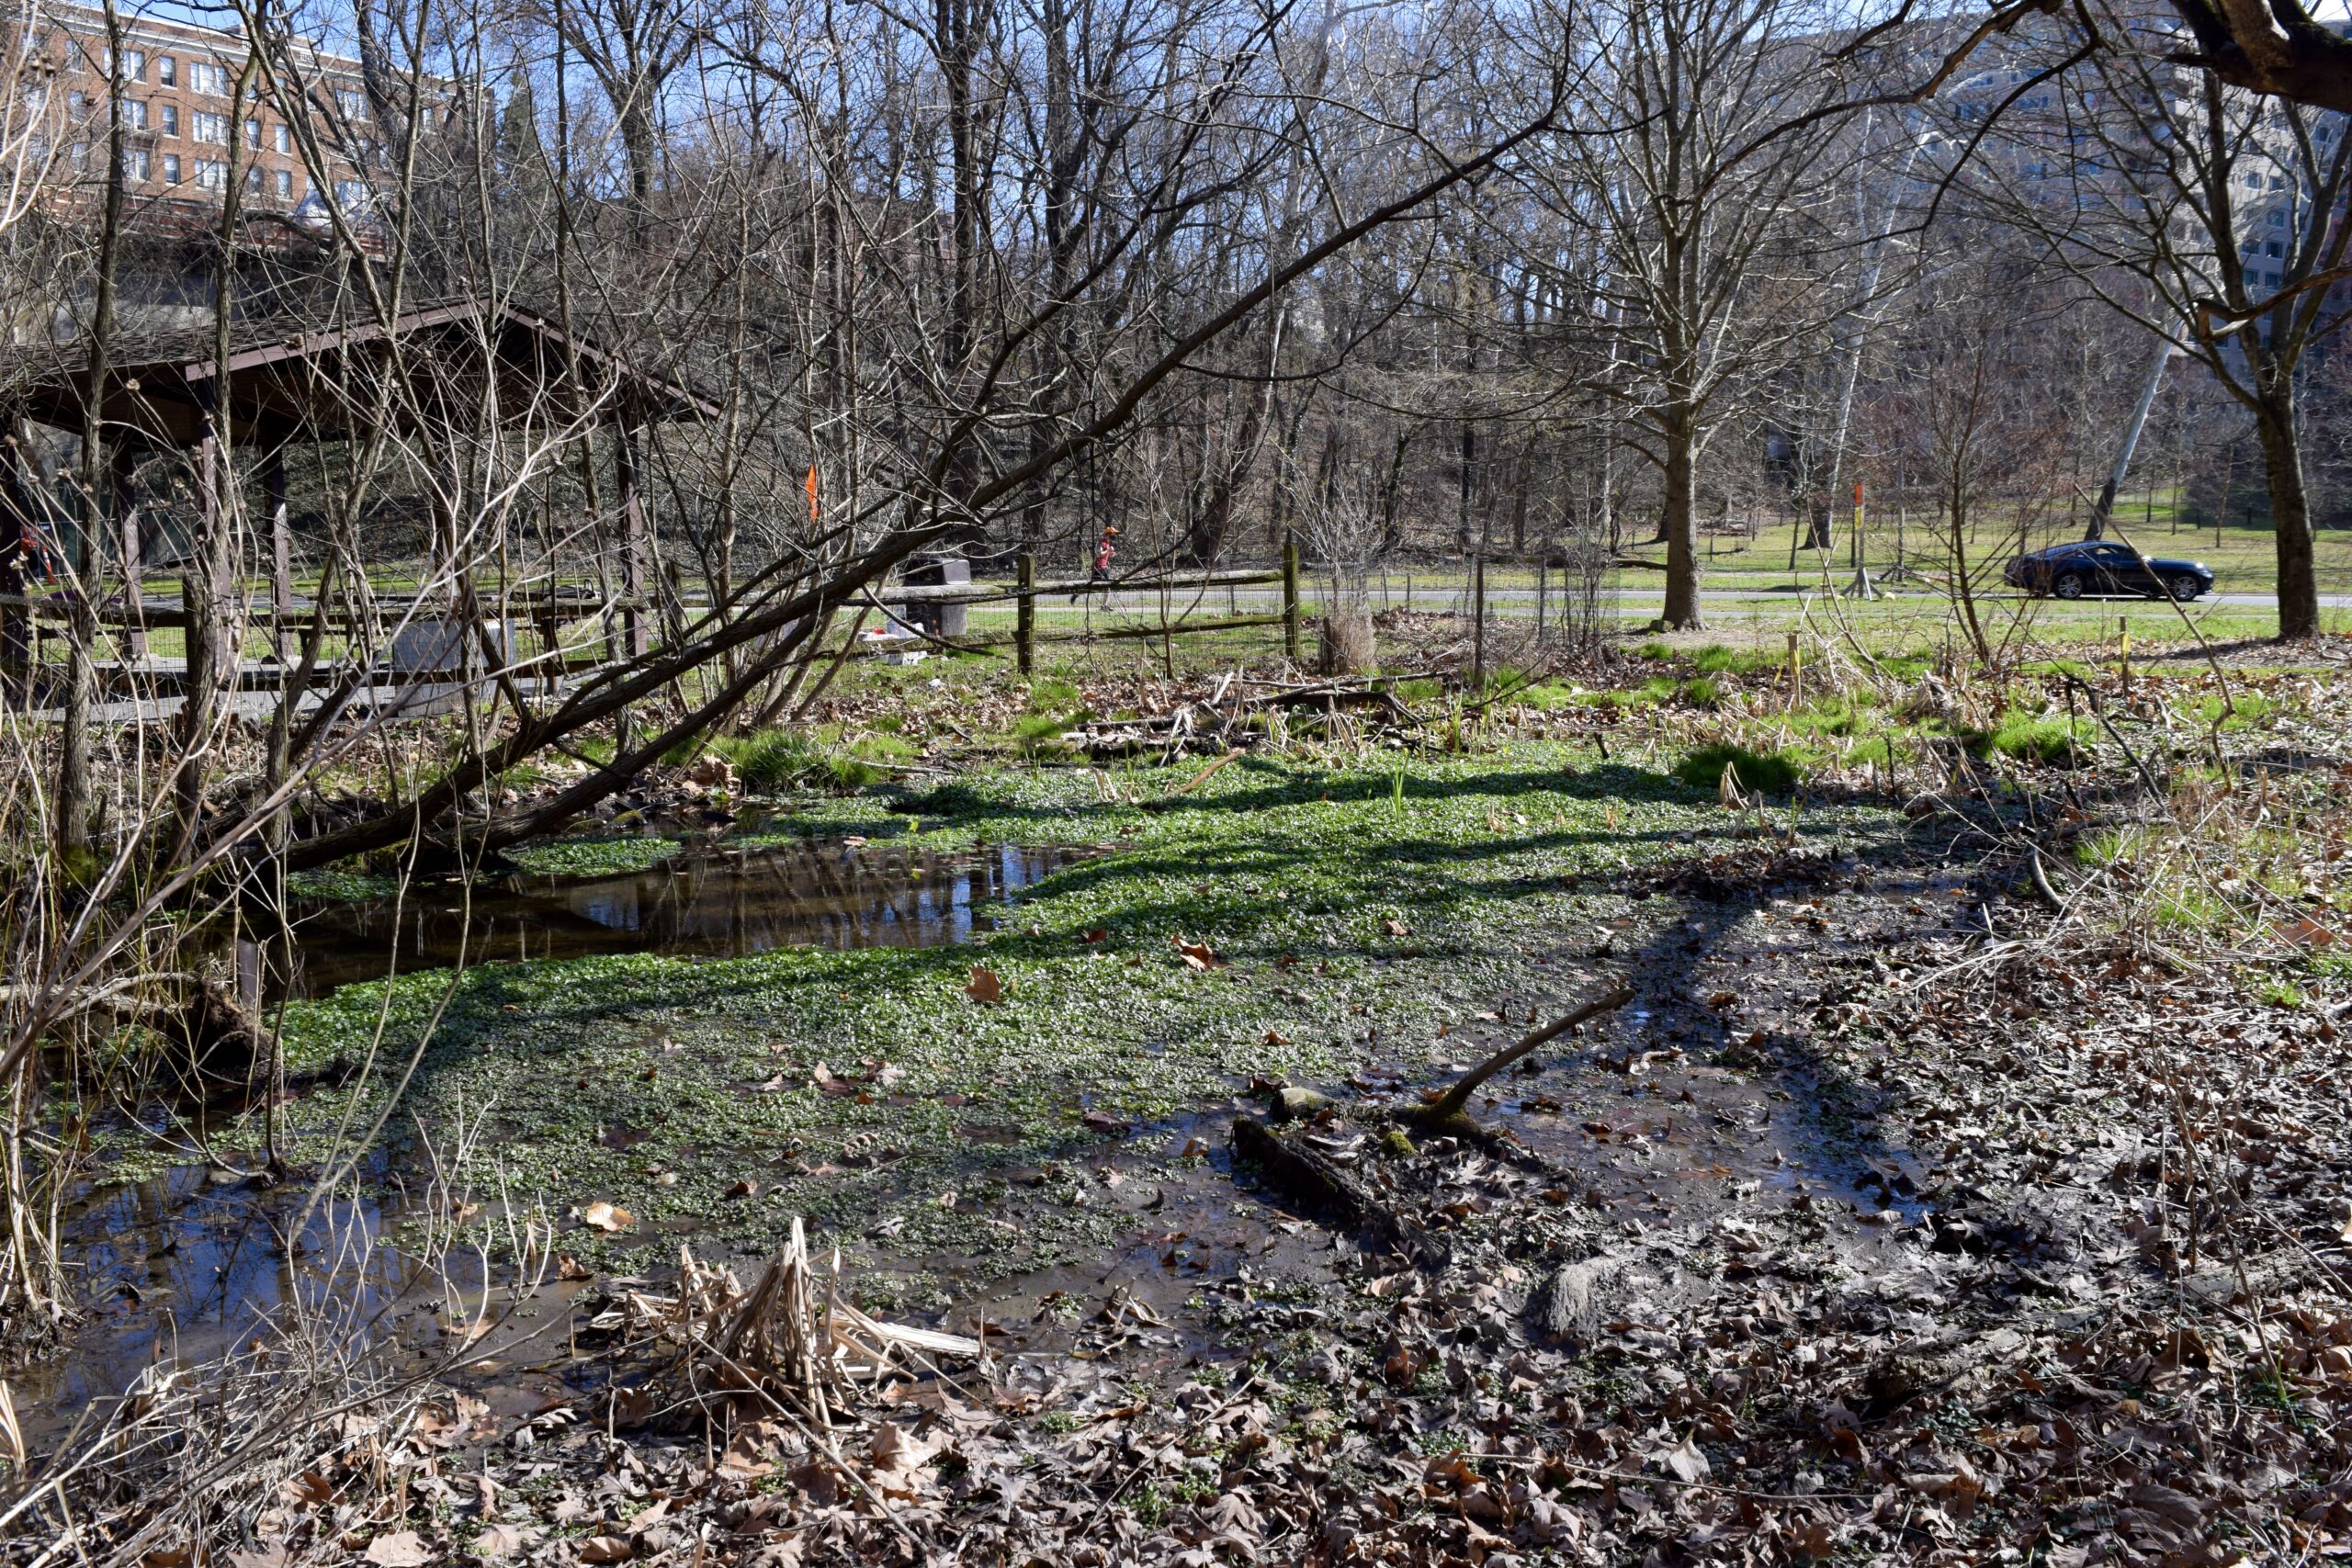 One of Rock Creek Songbirds’ restoration projects lies just yards off Piney Branch Parkway near Rock Creek Park’s Picnic Pavilion 29. The area was originally a heavily forested stream valley but was closed off to create Piney Branch Parkway in the 1930s followed by residential, commercial, and other urban development. From the road, the area looks unassuming, but Dryden and volunteers have spent years planting trees, grasses, and other plants to restore the wetland habitat.